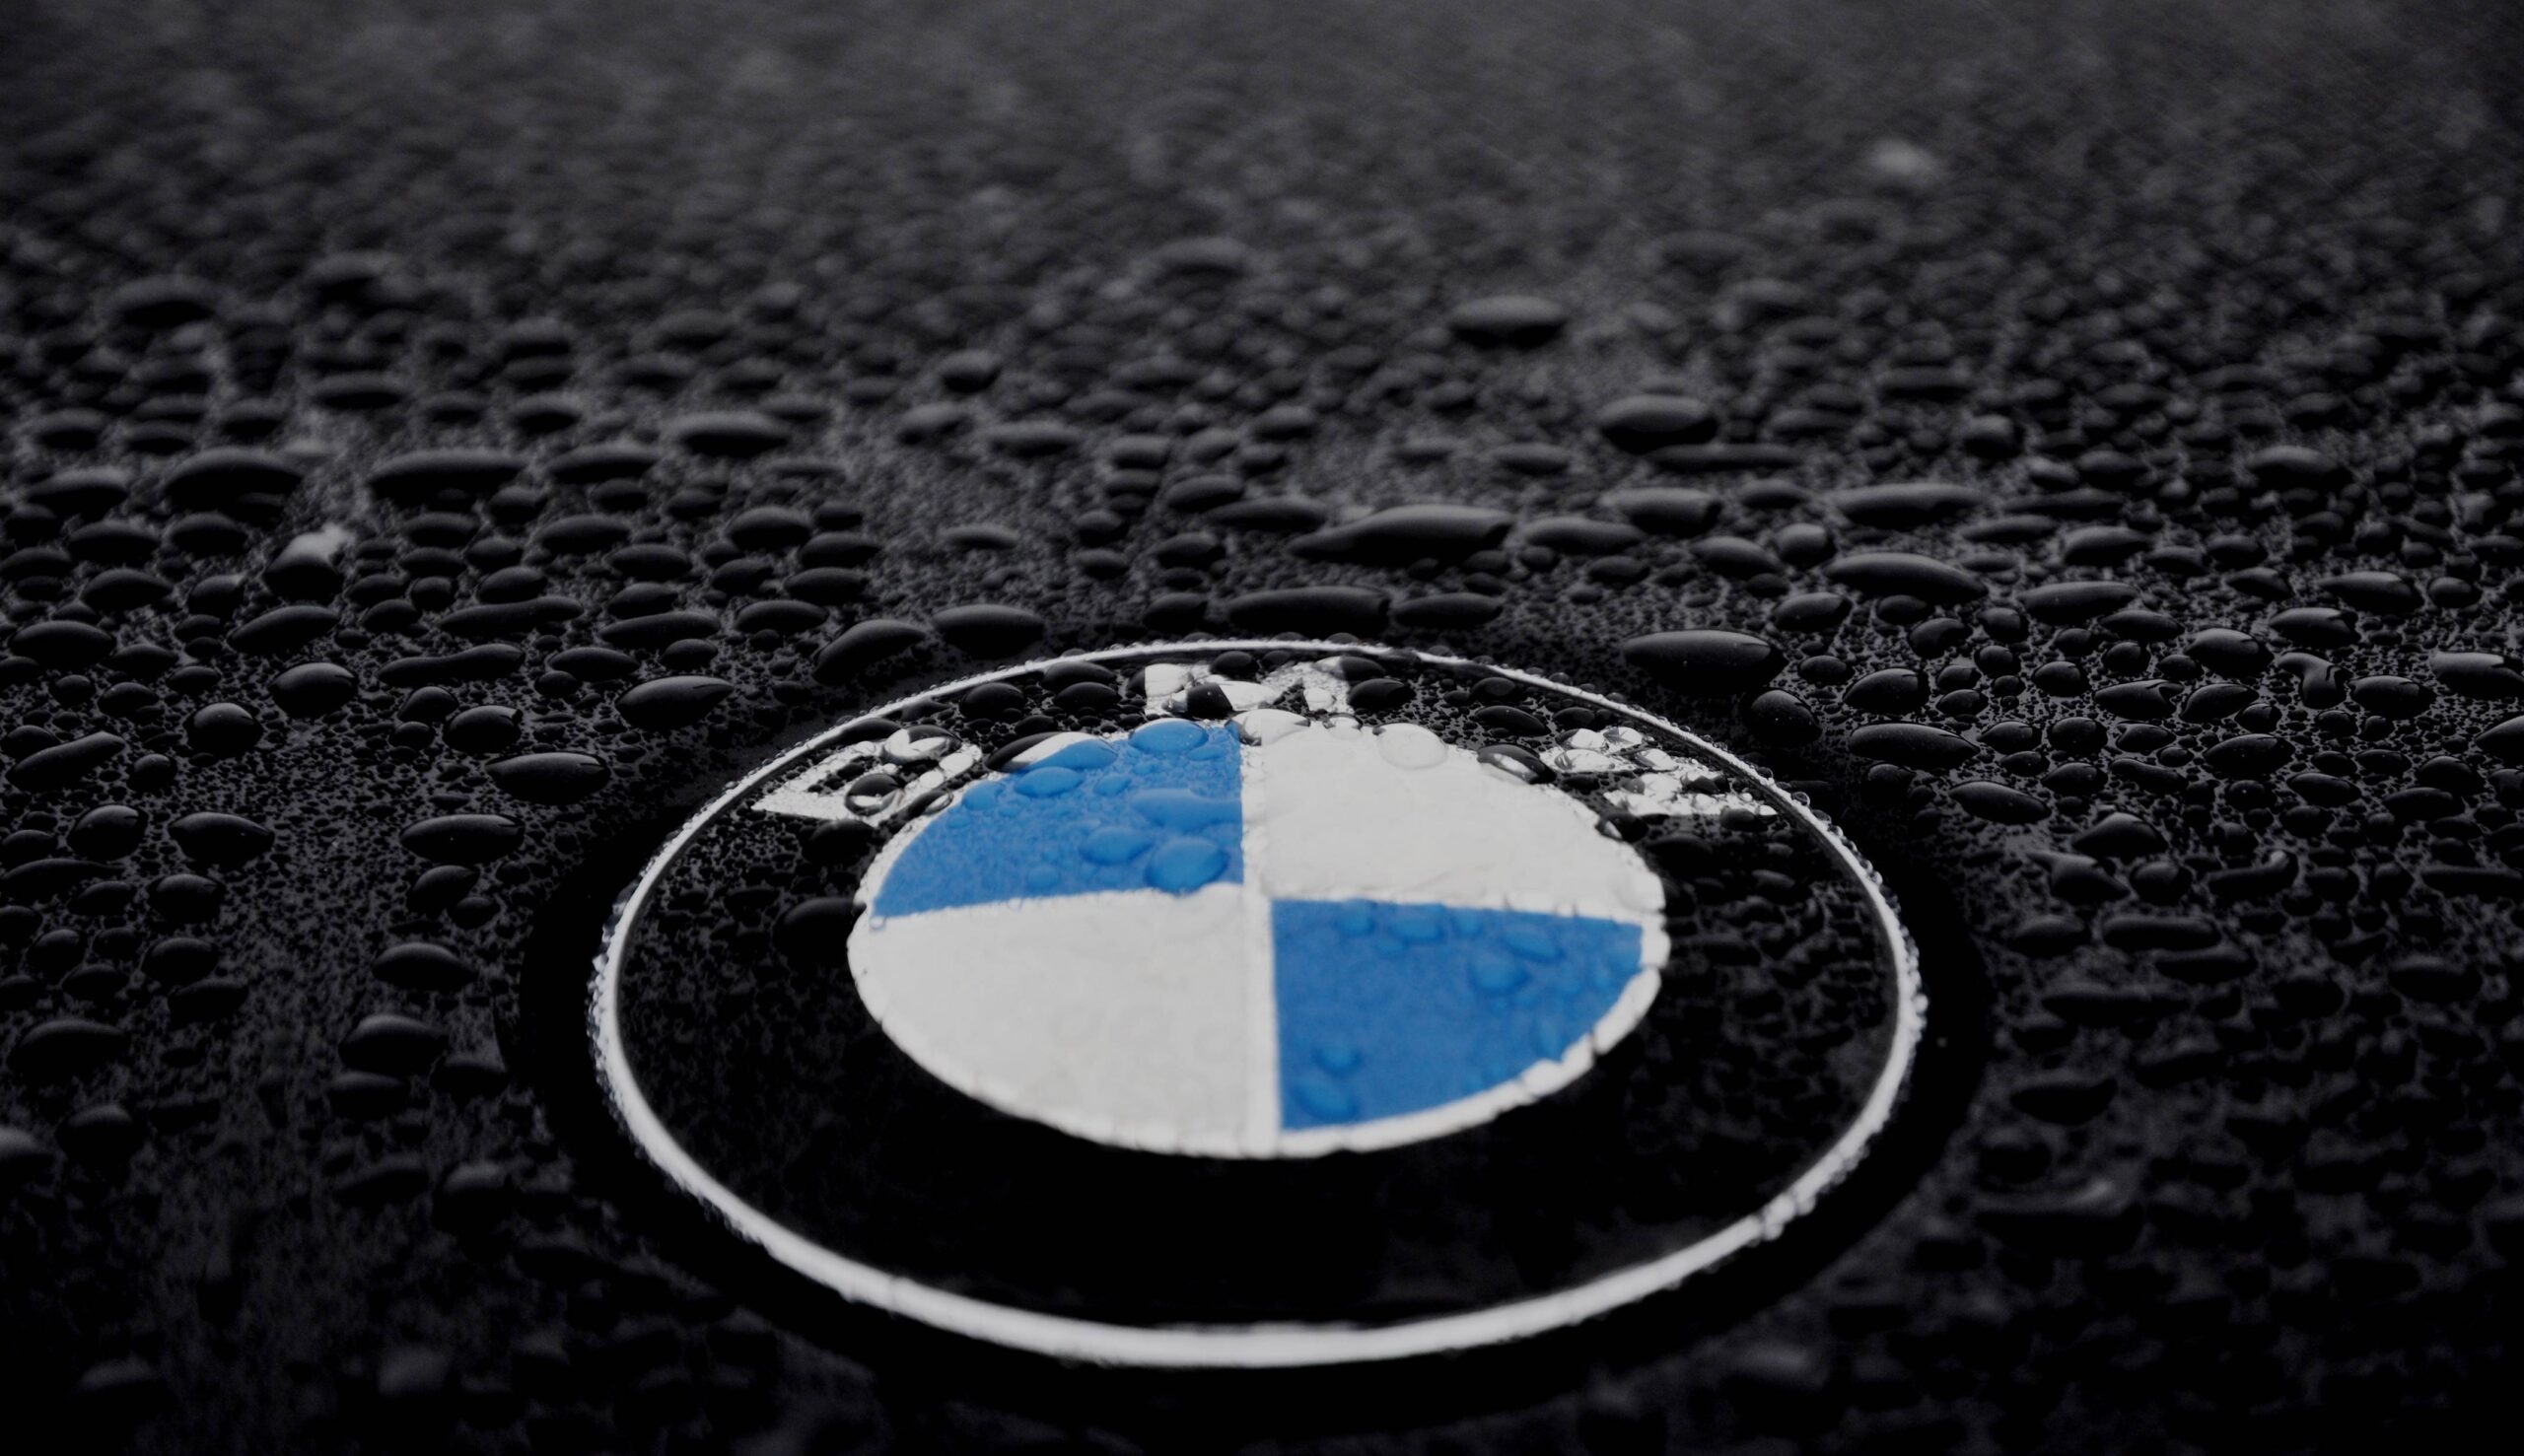 Bmw logo cars best cool wallpapers